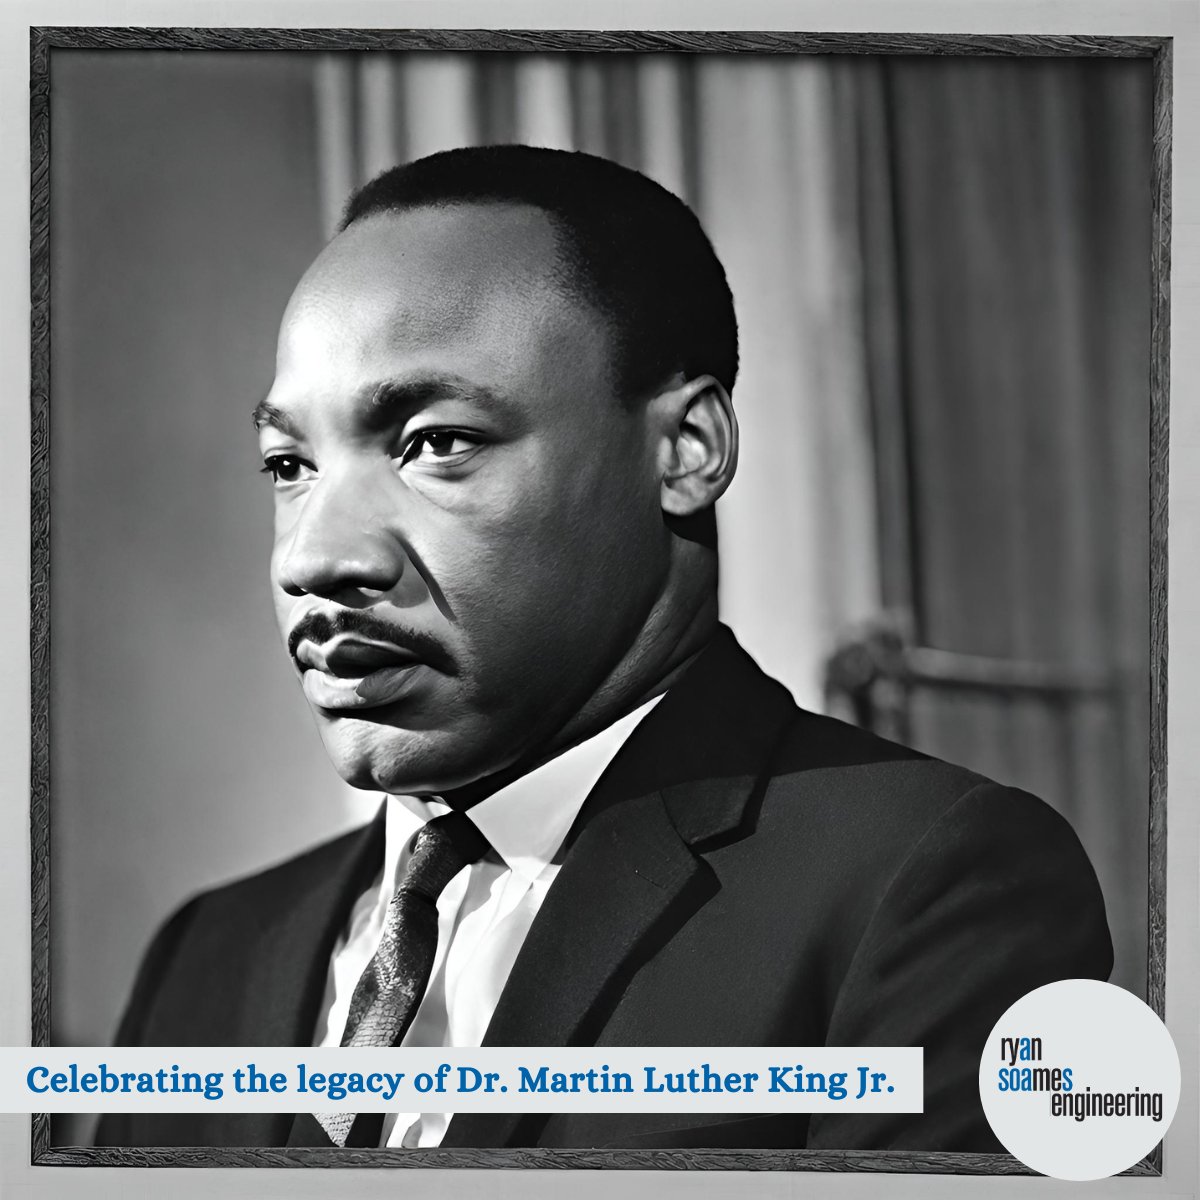 Today, we celebrate the legacy of Martin Luther King Jr. Thank you for leading the fight for Civil Rights. #MEP #MEPEngineering #MEPEngineer #MEPFP  #RyanSoamesEngineering #RyanSoames #RSE #weareengineers #engineering #EngineeringisFun #MLKDay #MartinLutherKingJr